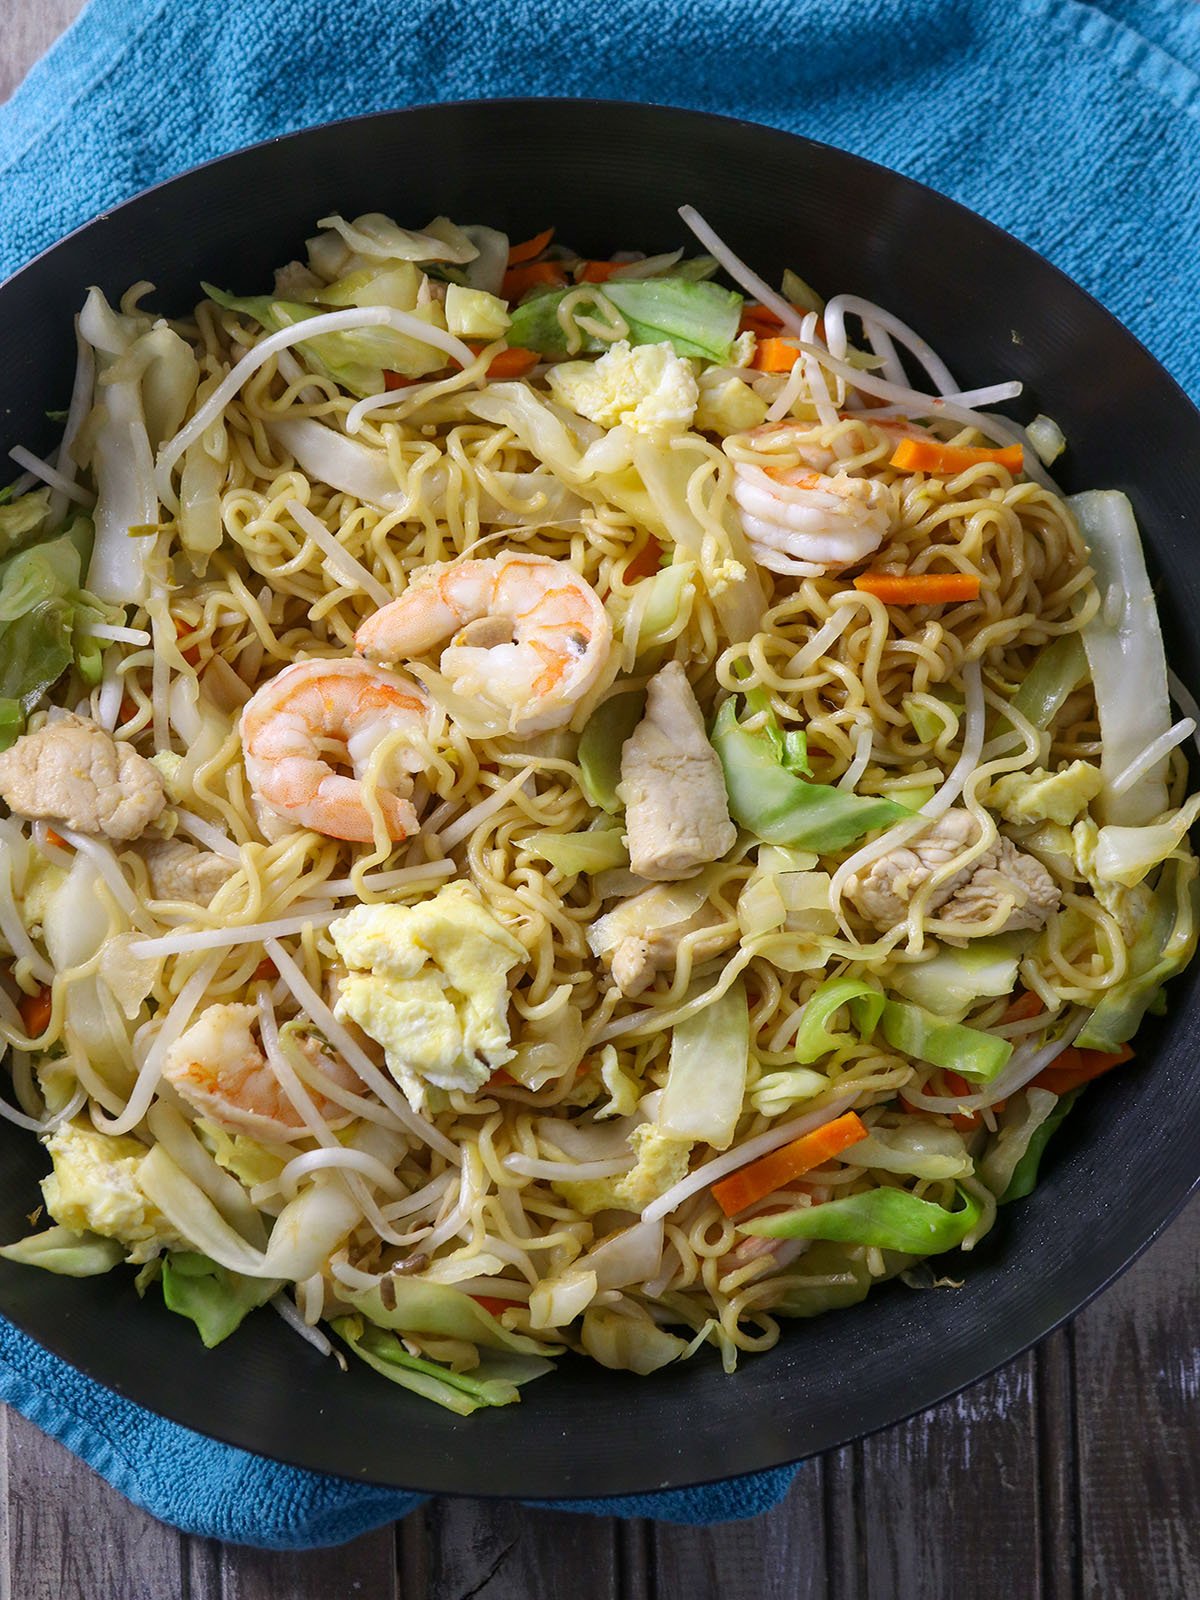 stir-fried ramen noodles with shrimp, chicken, and veggies in a pan.